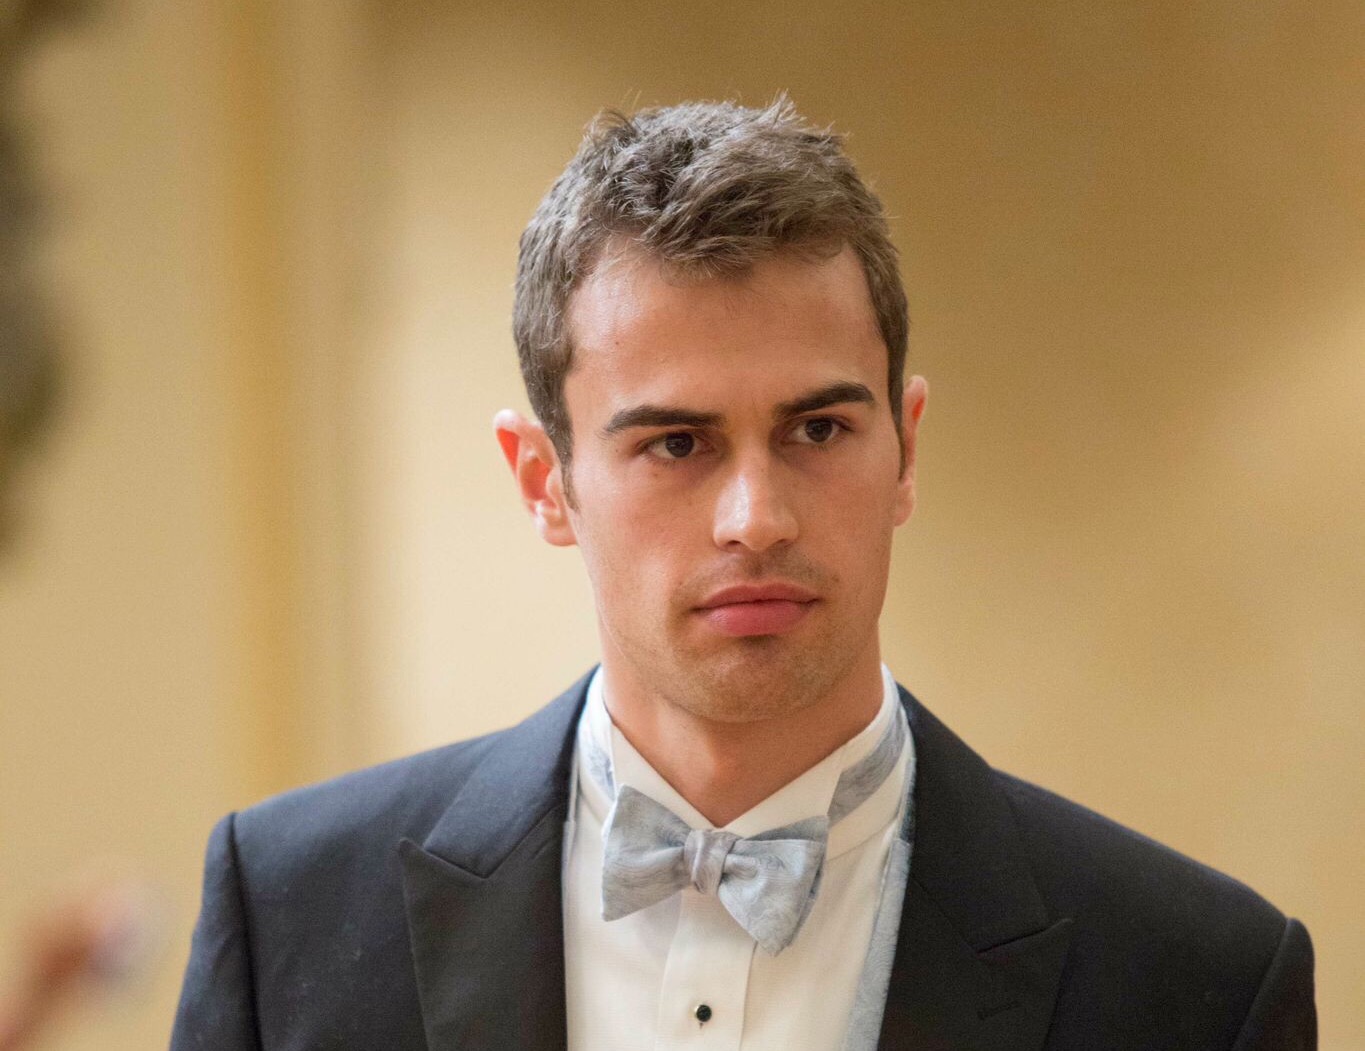 Theo James’ Film ‘Franny’ to Have Its World Premiere on April 17, 2015 at the Tribeca Film Festival